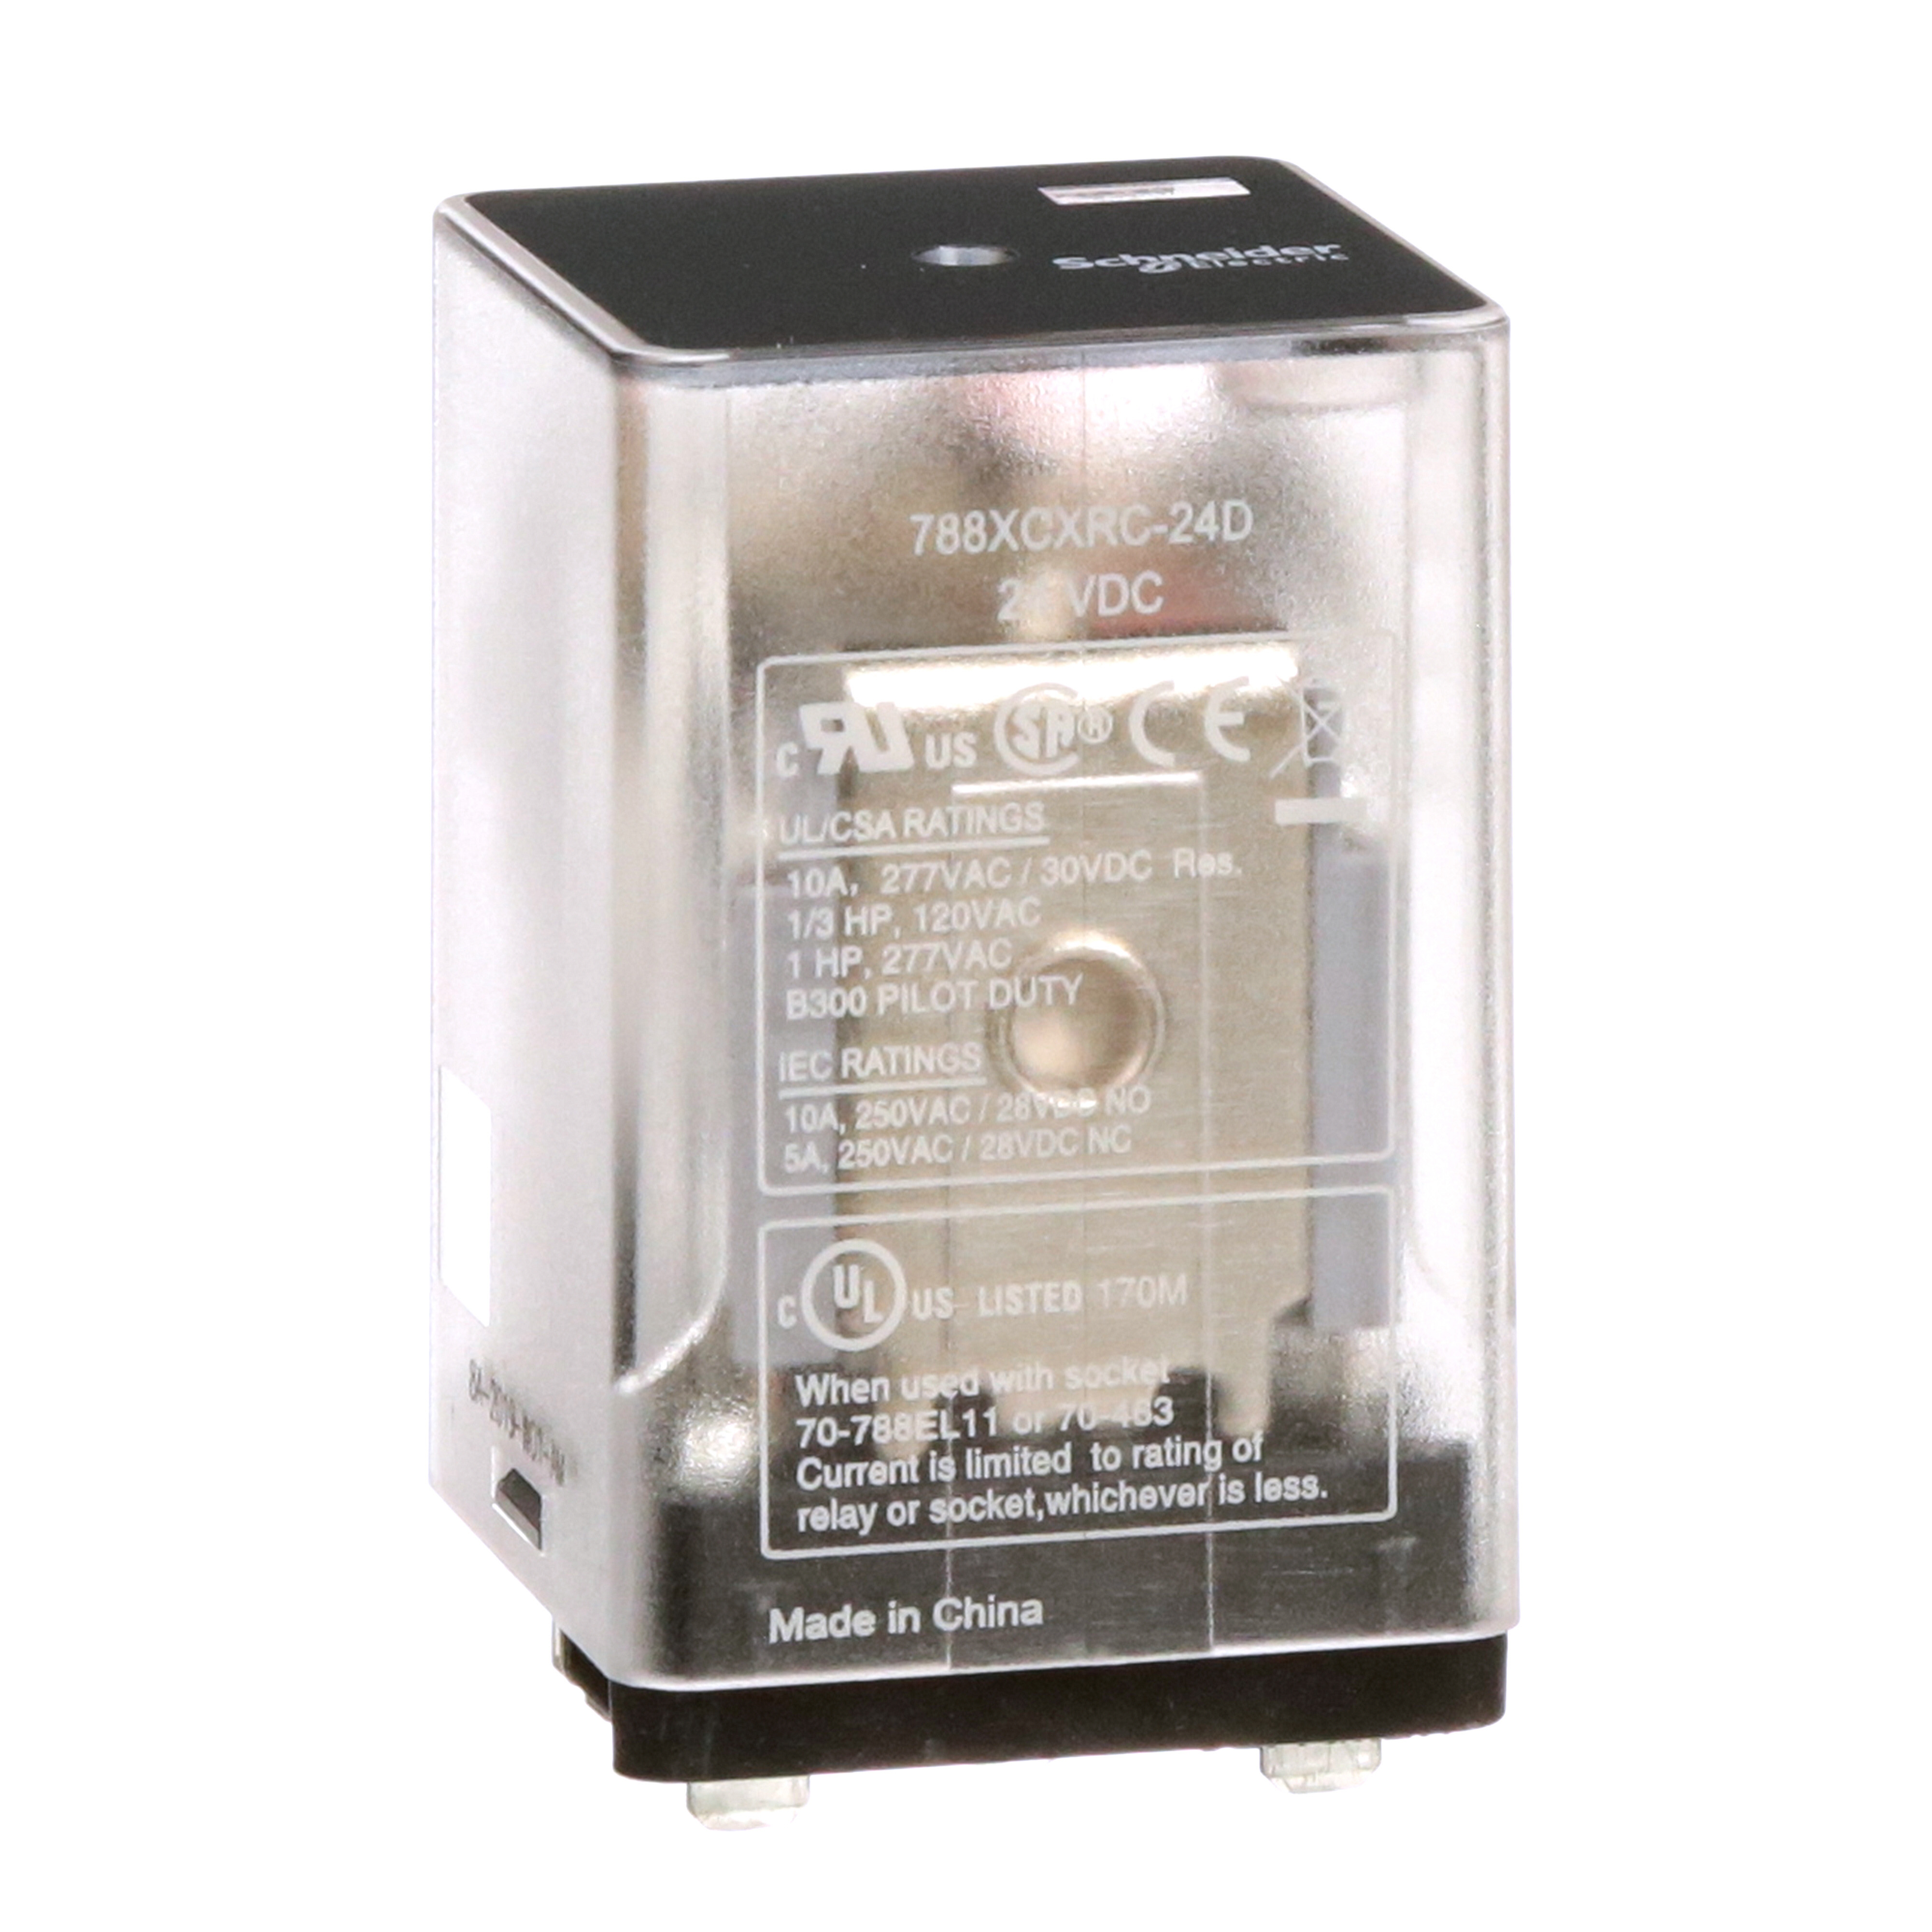 Plug-in electromechanical relay, General Purpose Relays, 788 R, 3PDT, clear cover, blade terminal, 10A, 24V DC, 3NC + 3NO